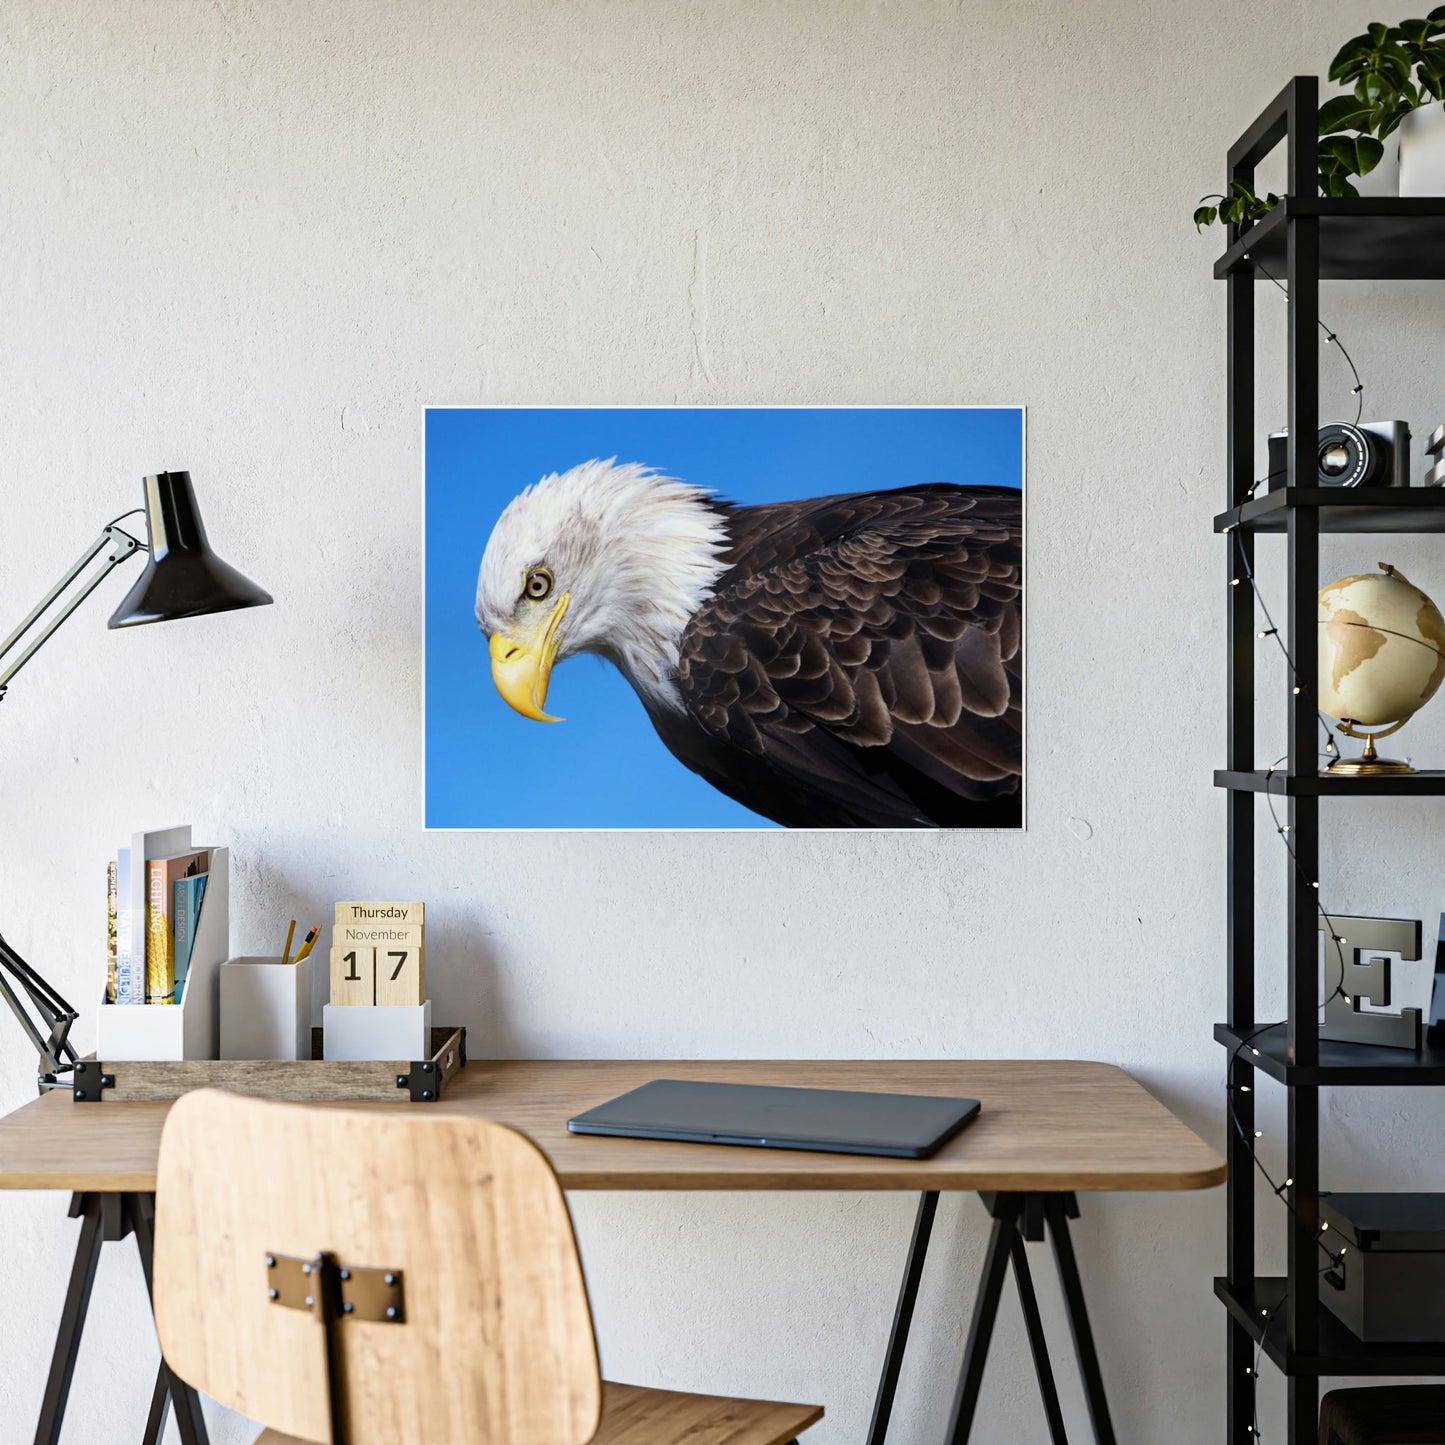 Eagle's Enchantment: Artistic Canvas Print Conjuring the Magic of their Presence